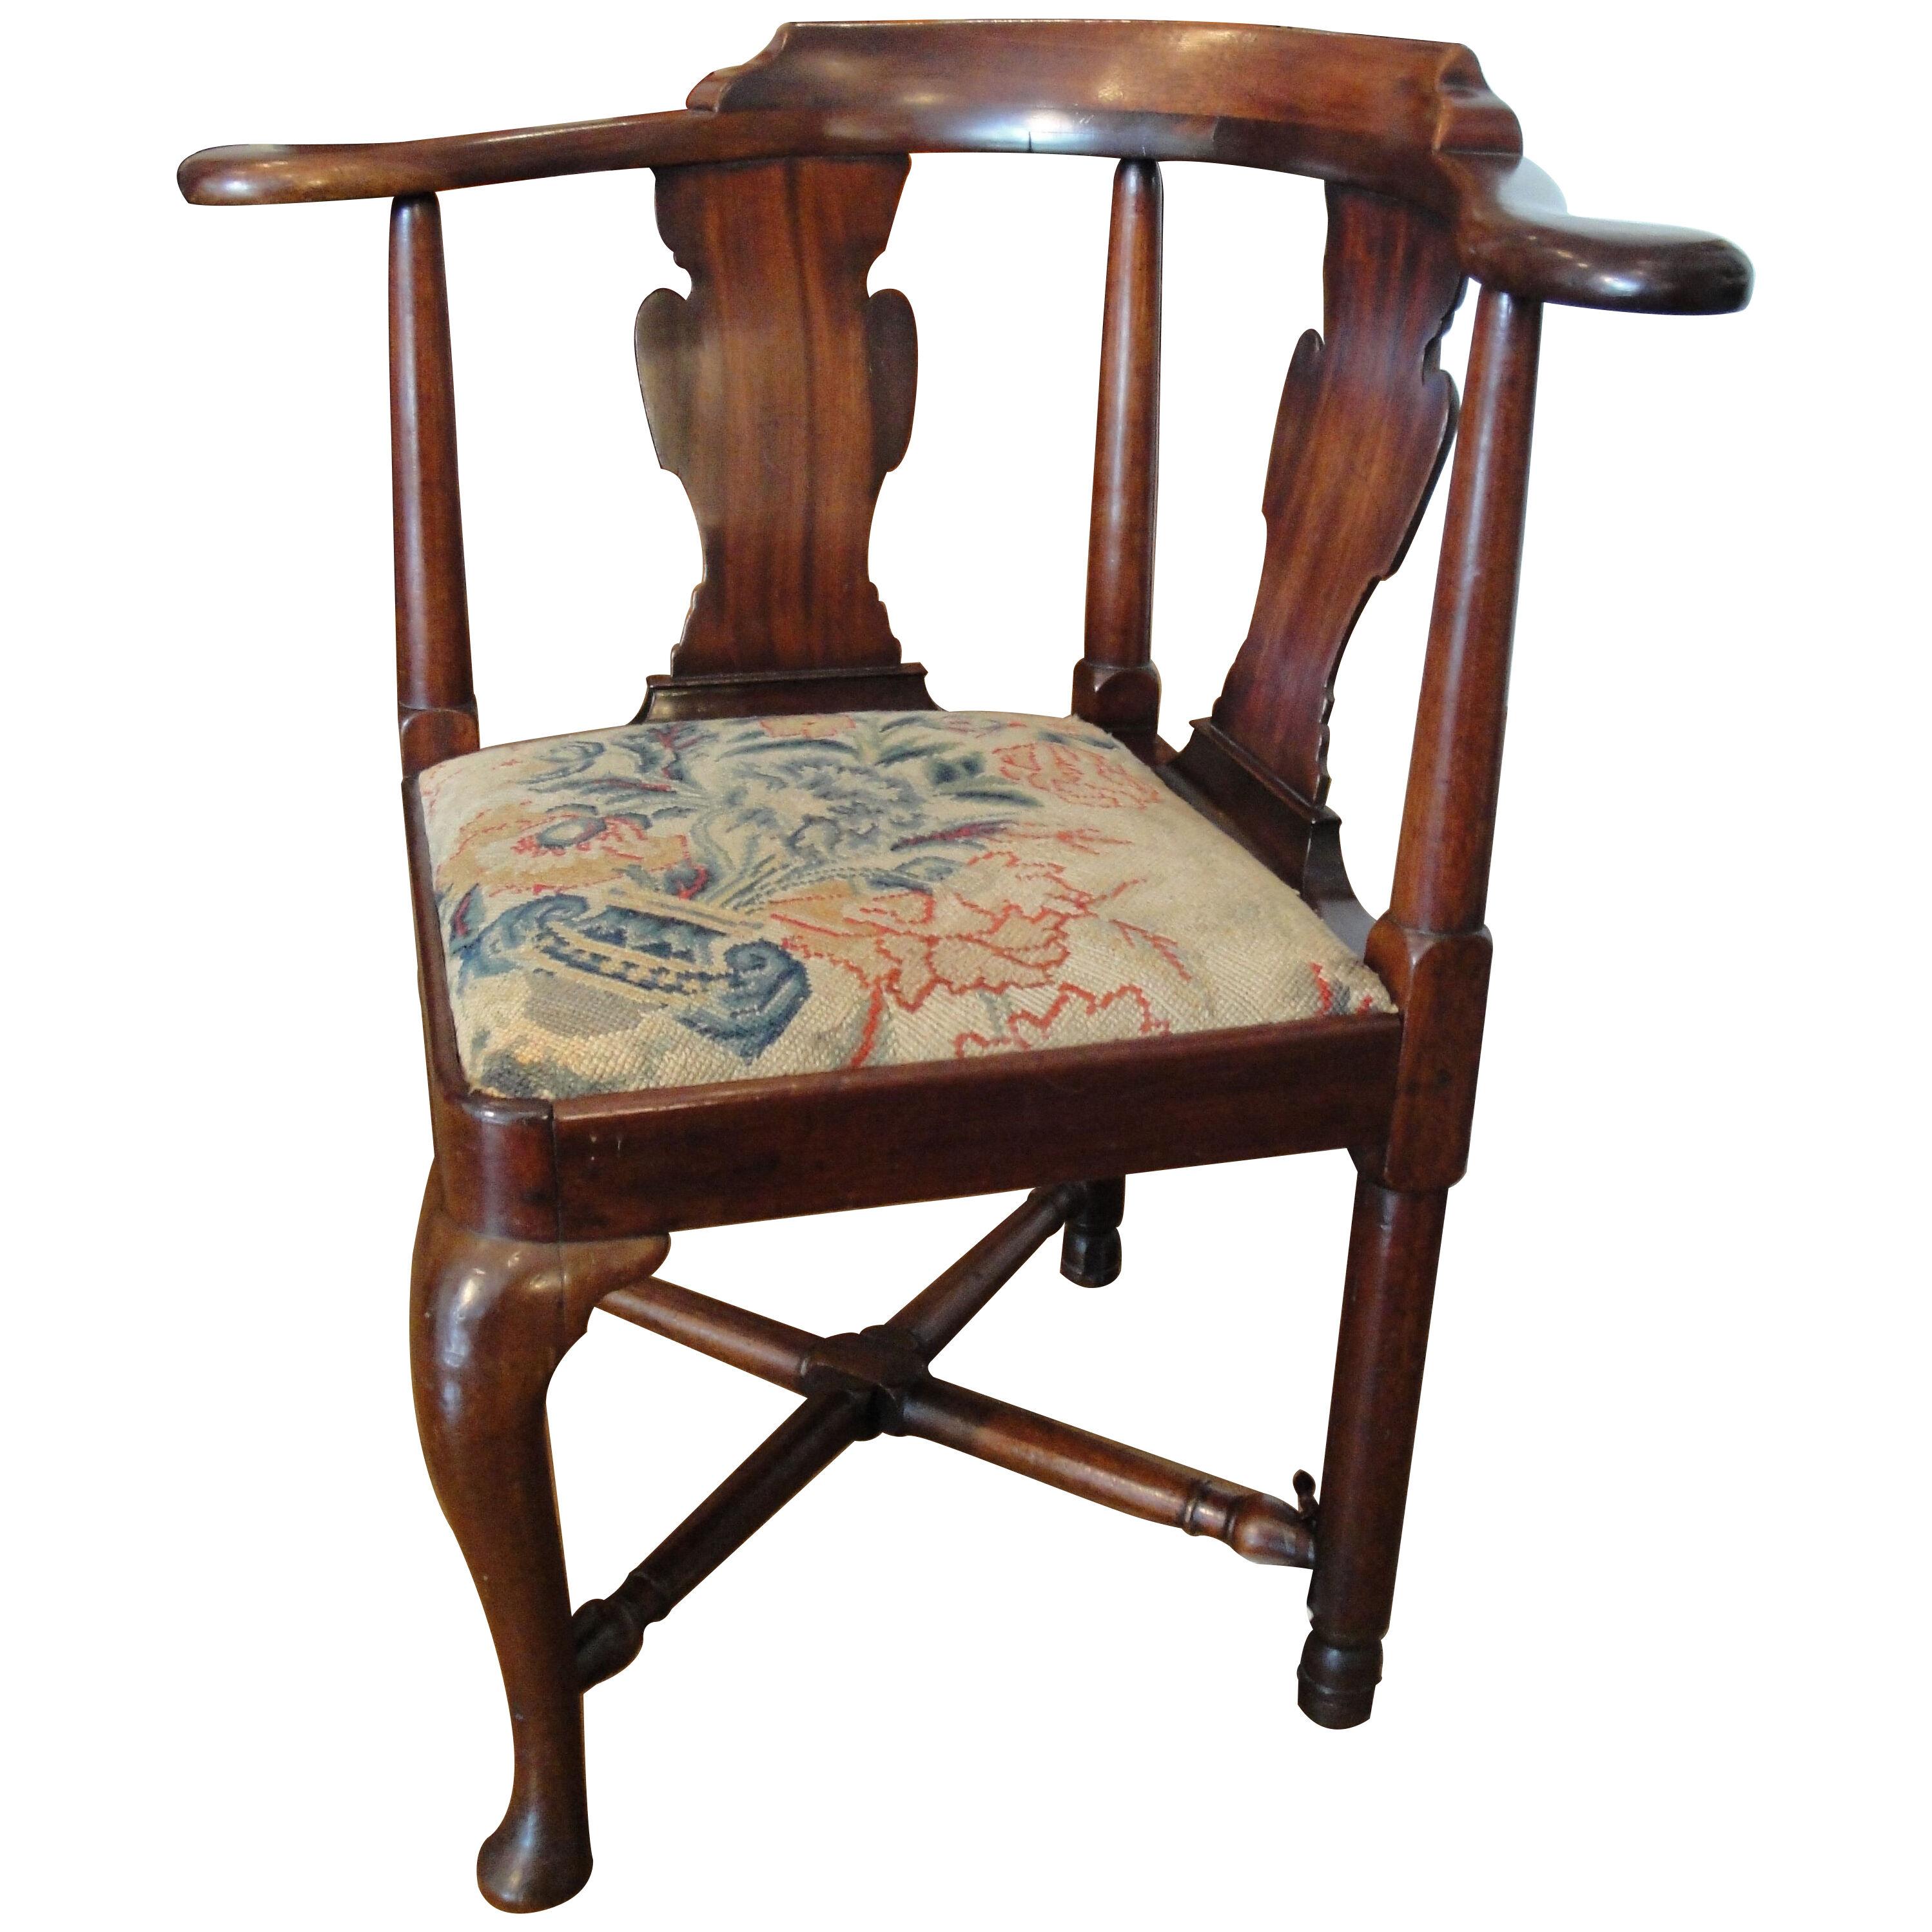 18th Century Mahogany Corner Chair With Tapestry Seat